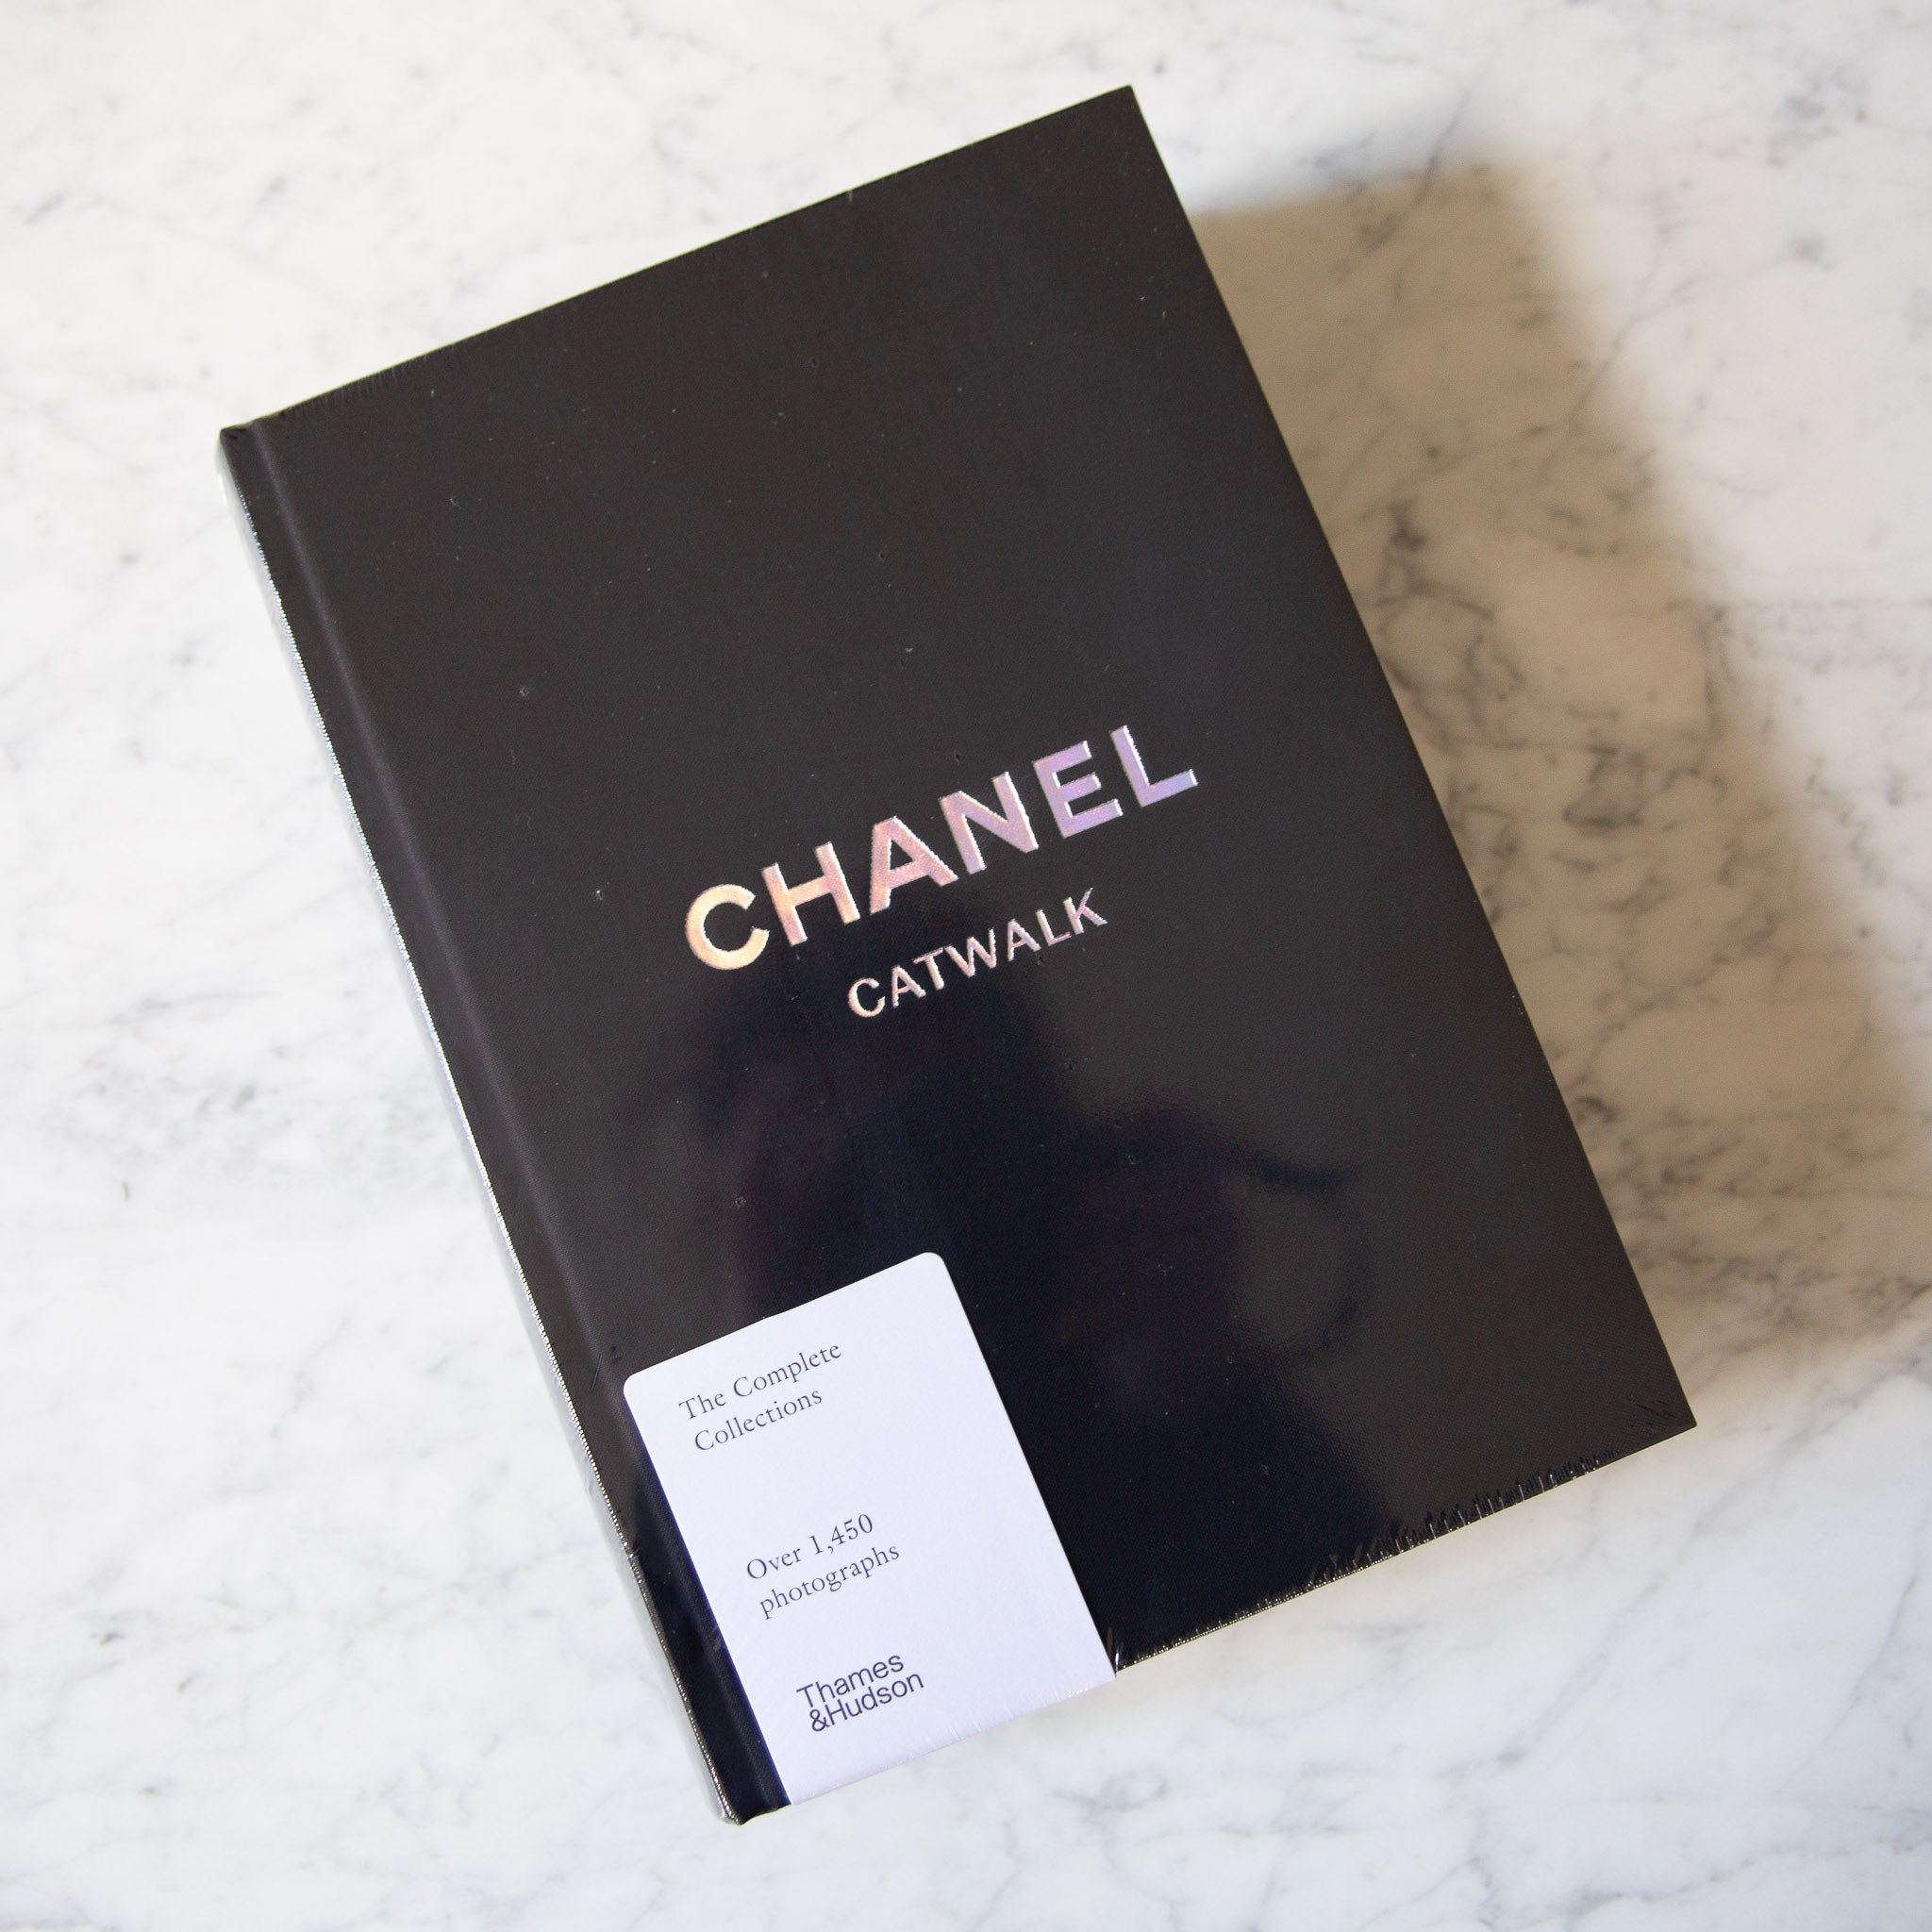 THAMES & HUDSON Chanel Catwalk: The Complete Collections book